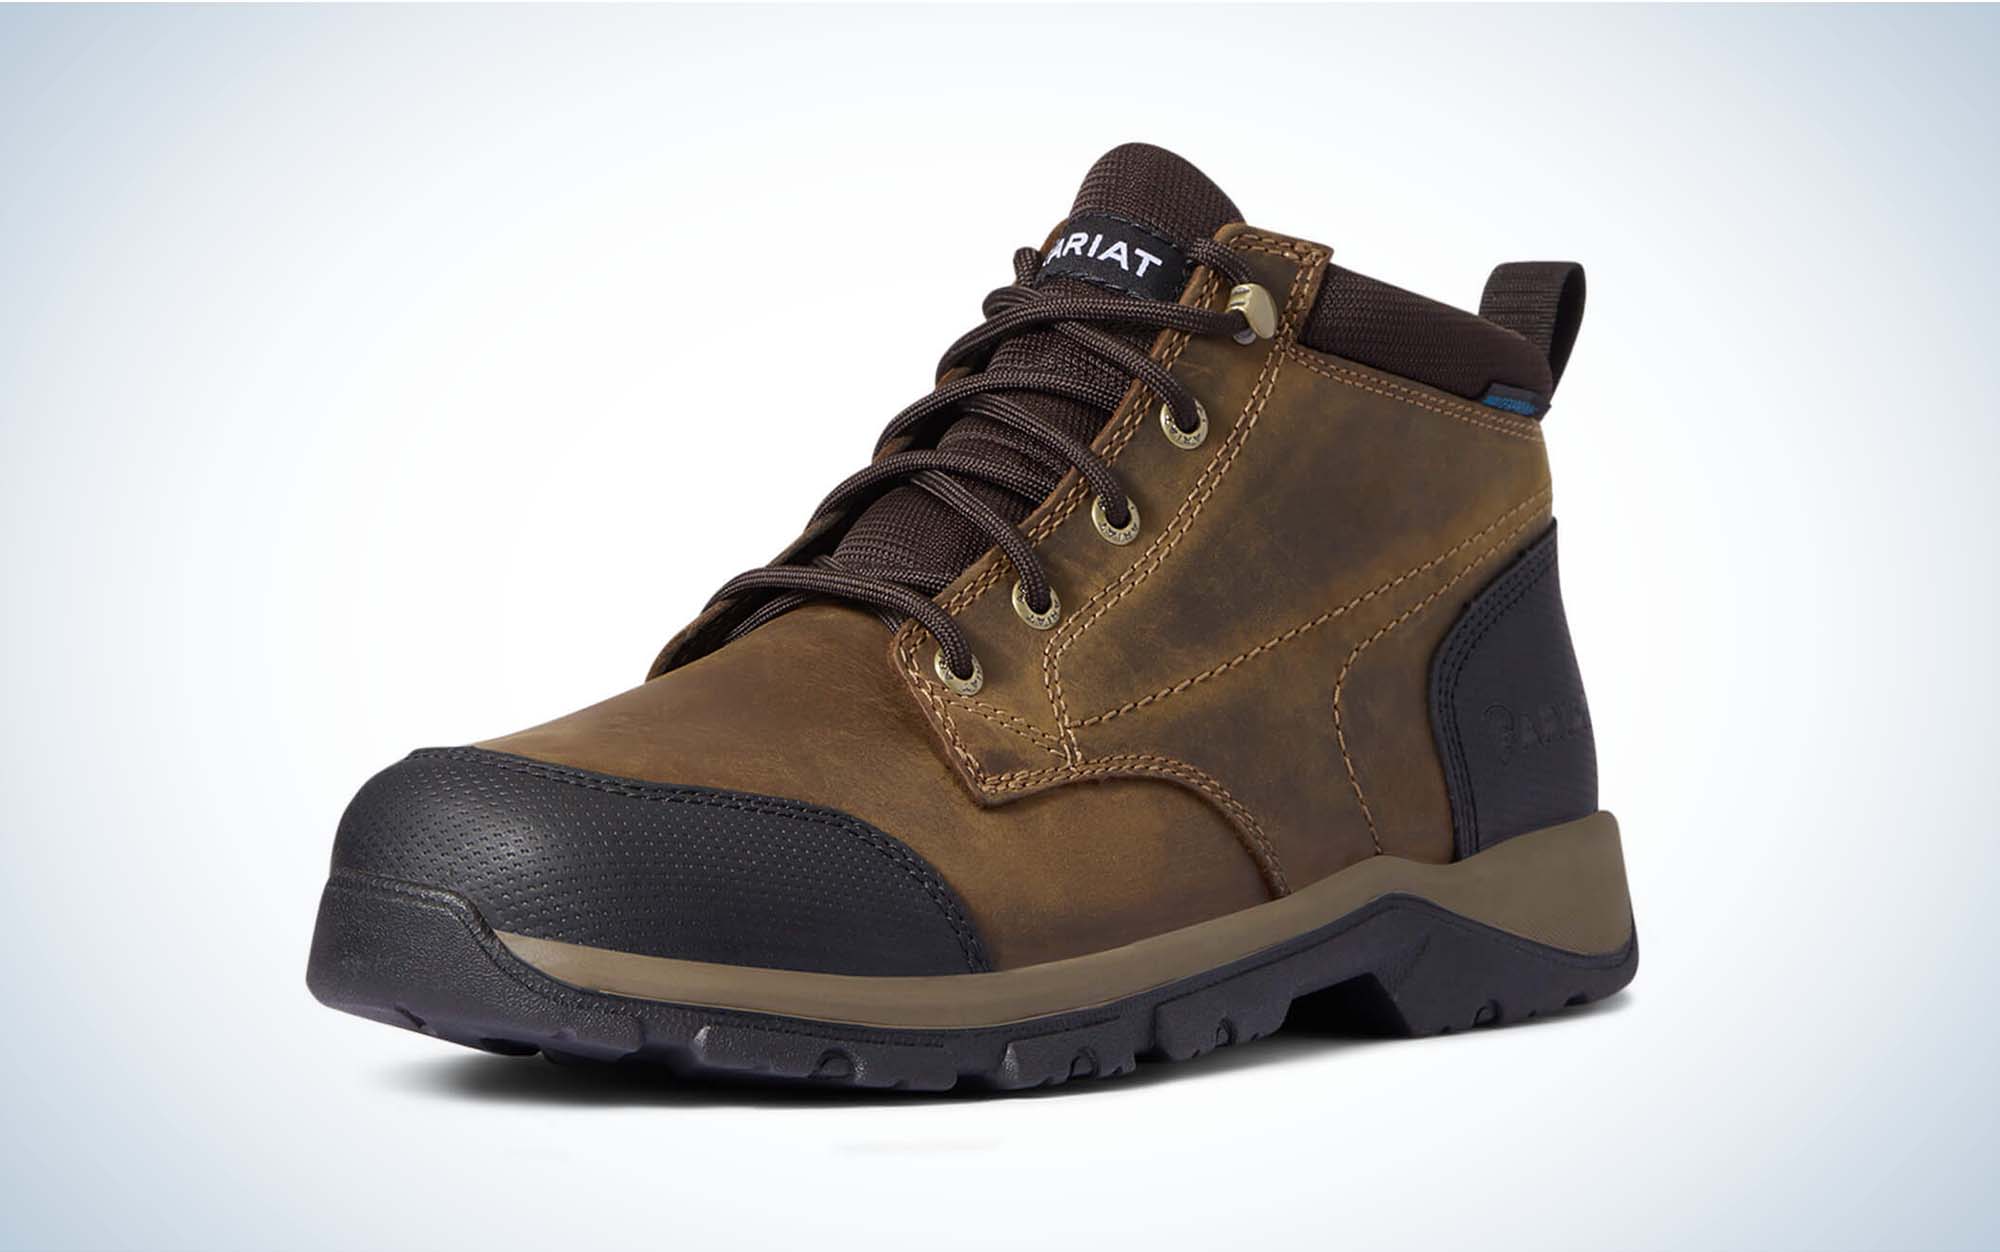 The Ariat Farmland is one of the best gifts for hunters